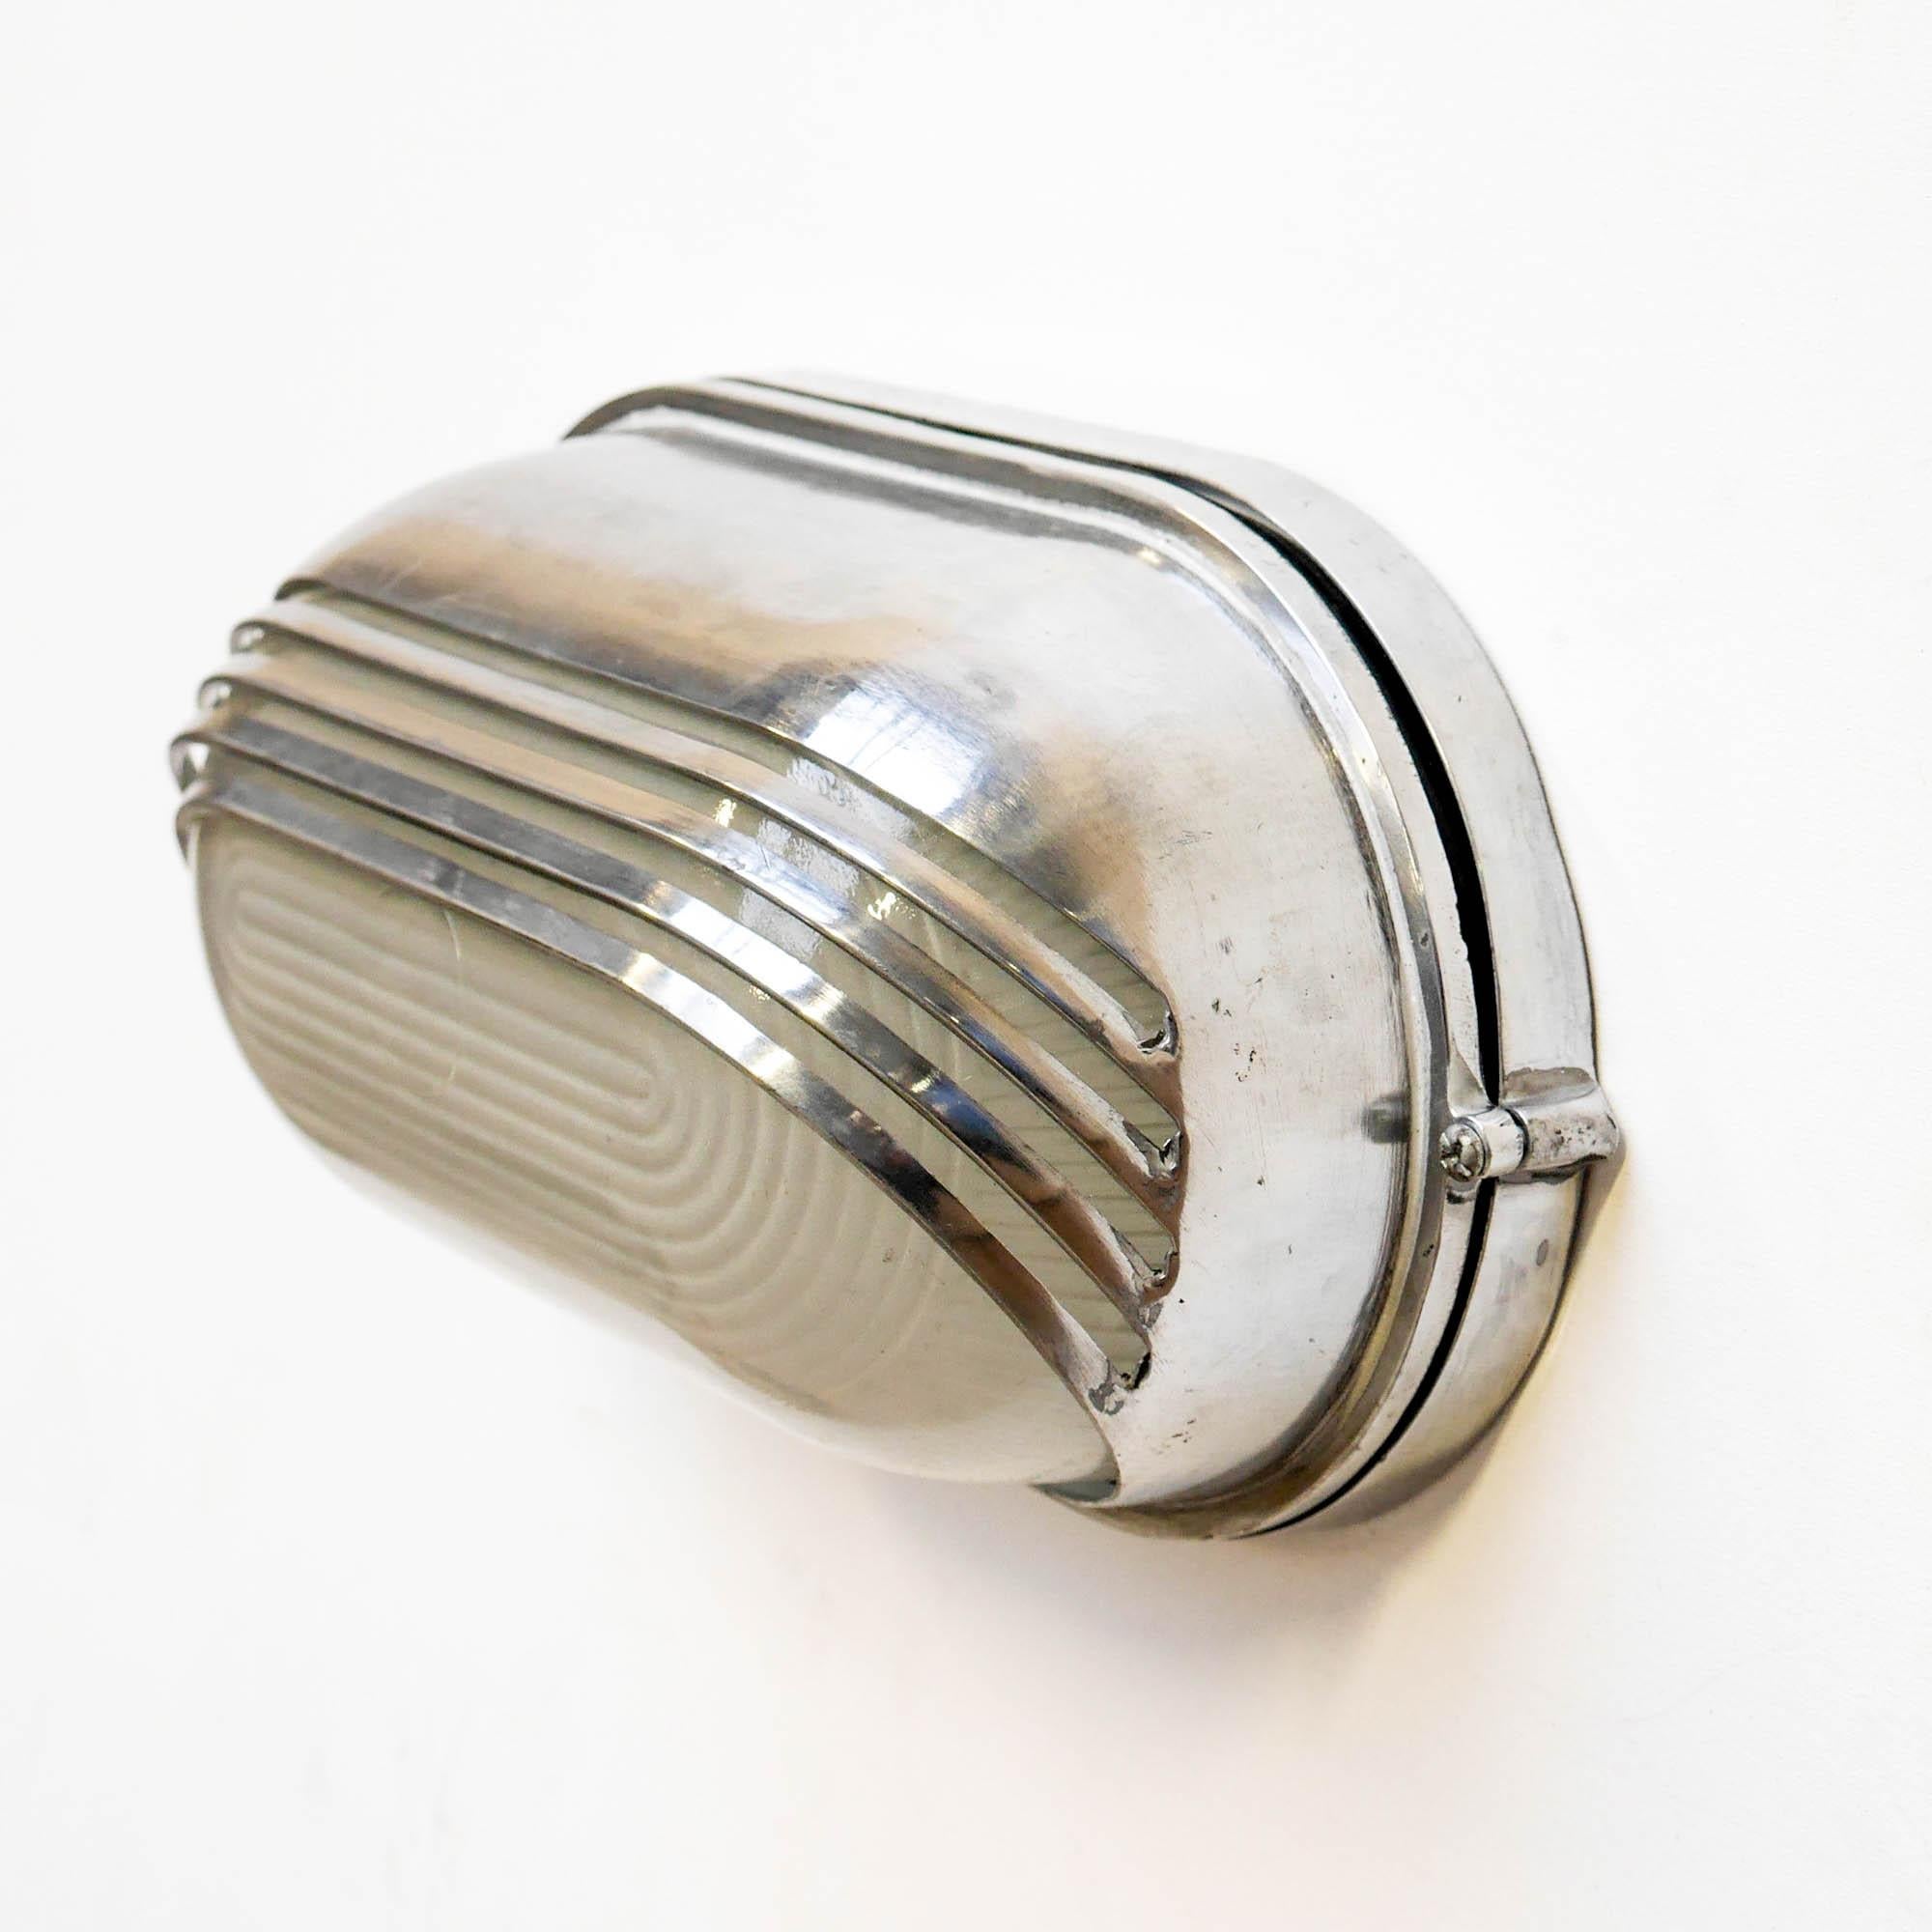 English Openworked Wall Light Large, in Polished Aluminium and Reeded Glass, circa 1970